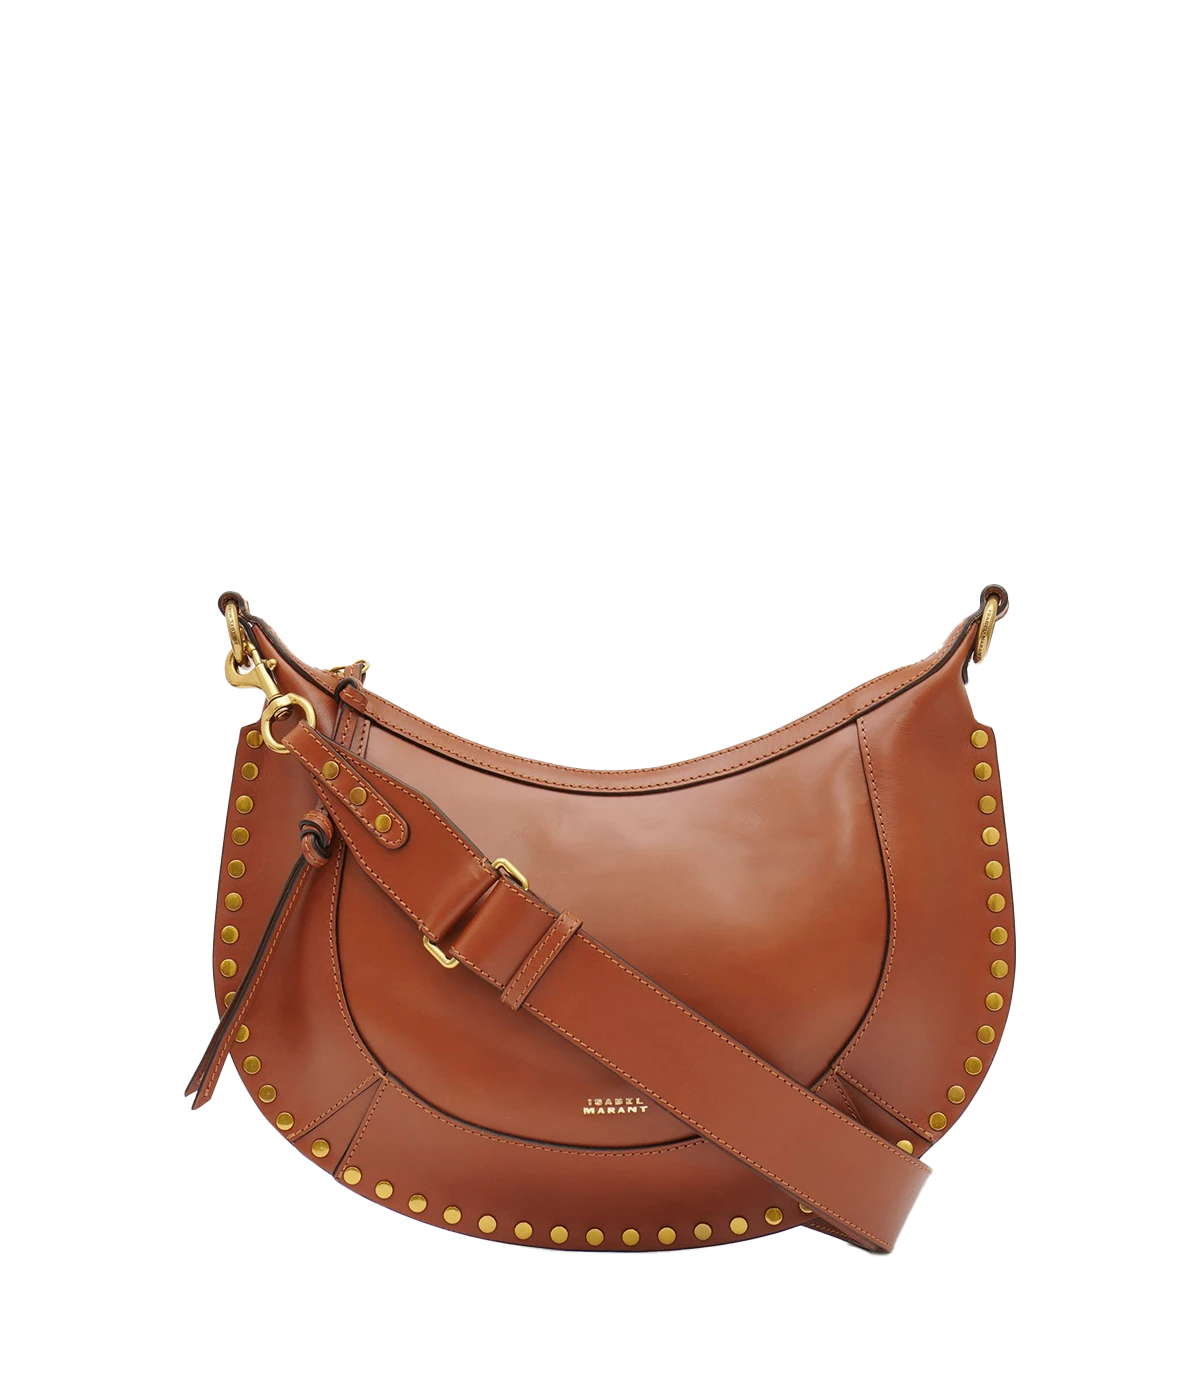 Carry the calf leather naoko by the round top handle or throw the detachable and adjustable leather strap over your shoulder. Gold tone studs and tonal stitching add subtle edge to this glamorous bag in a versatile cognac shade. 